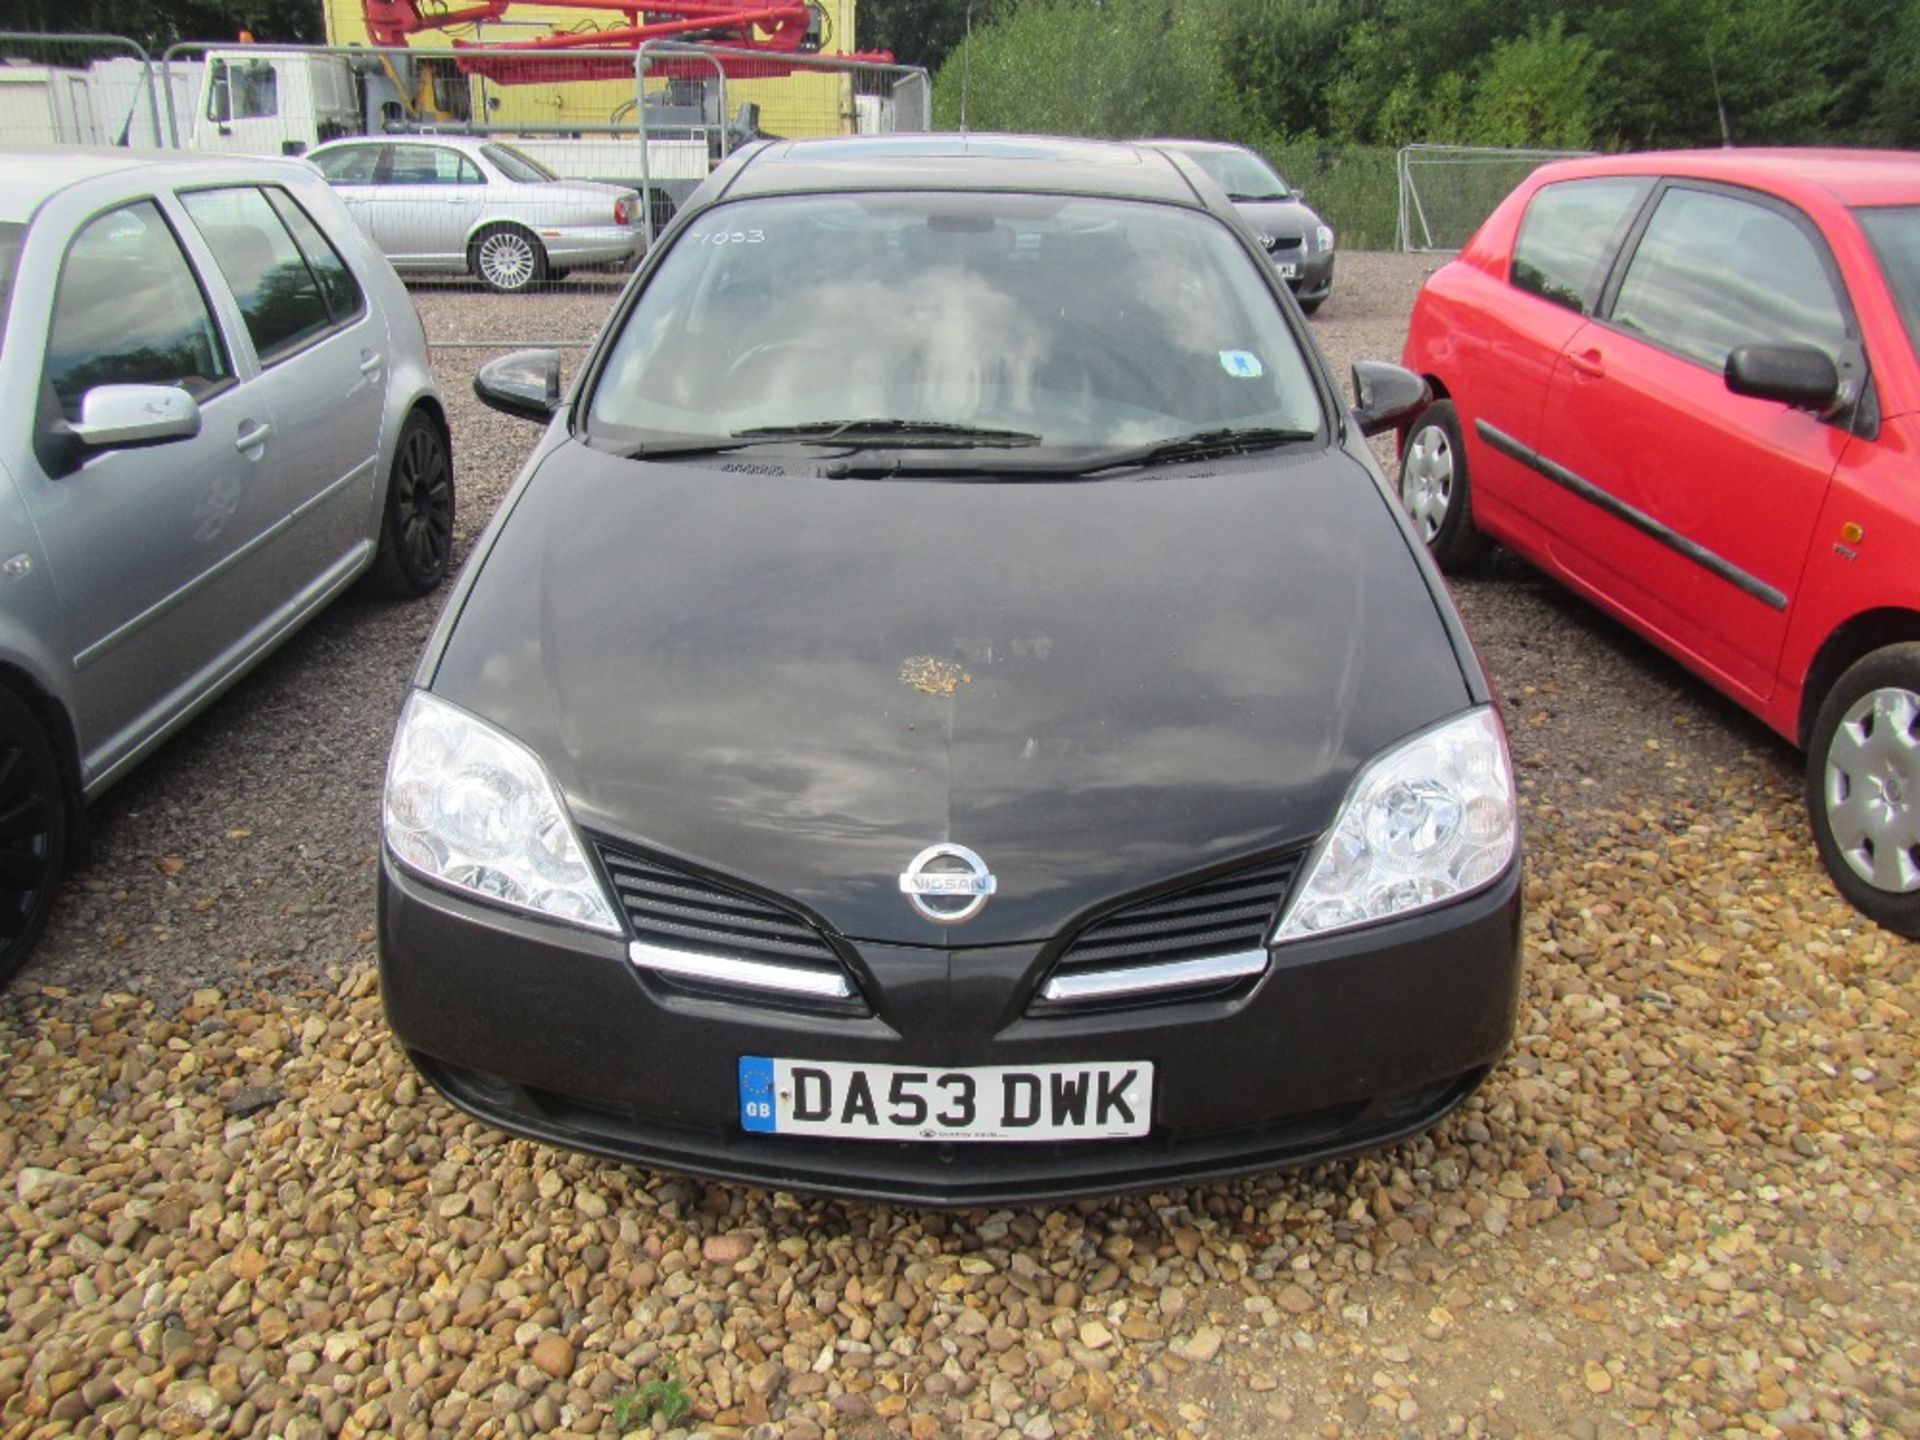 Nissan Primera 2.2 Diesel. V5 will be supplied Mileage: 122,385. MOT expired on 02/09/16 Reg. No. - Image 2 of 6